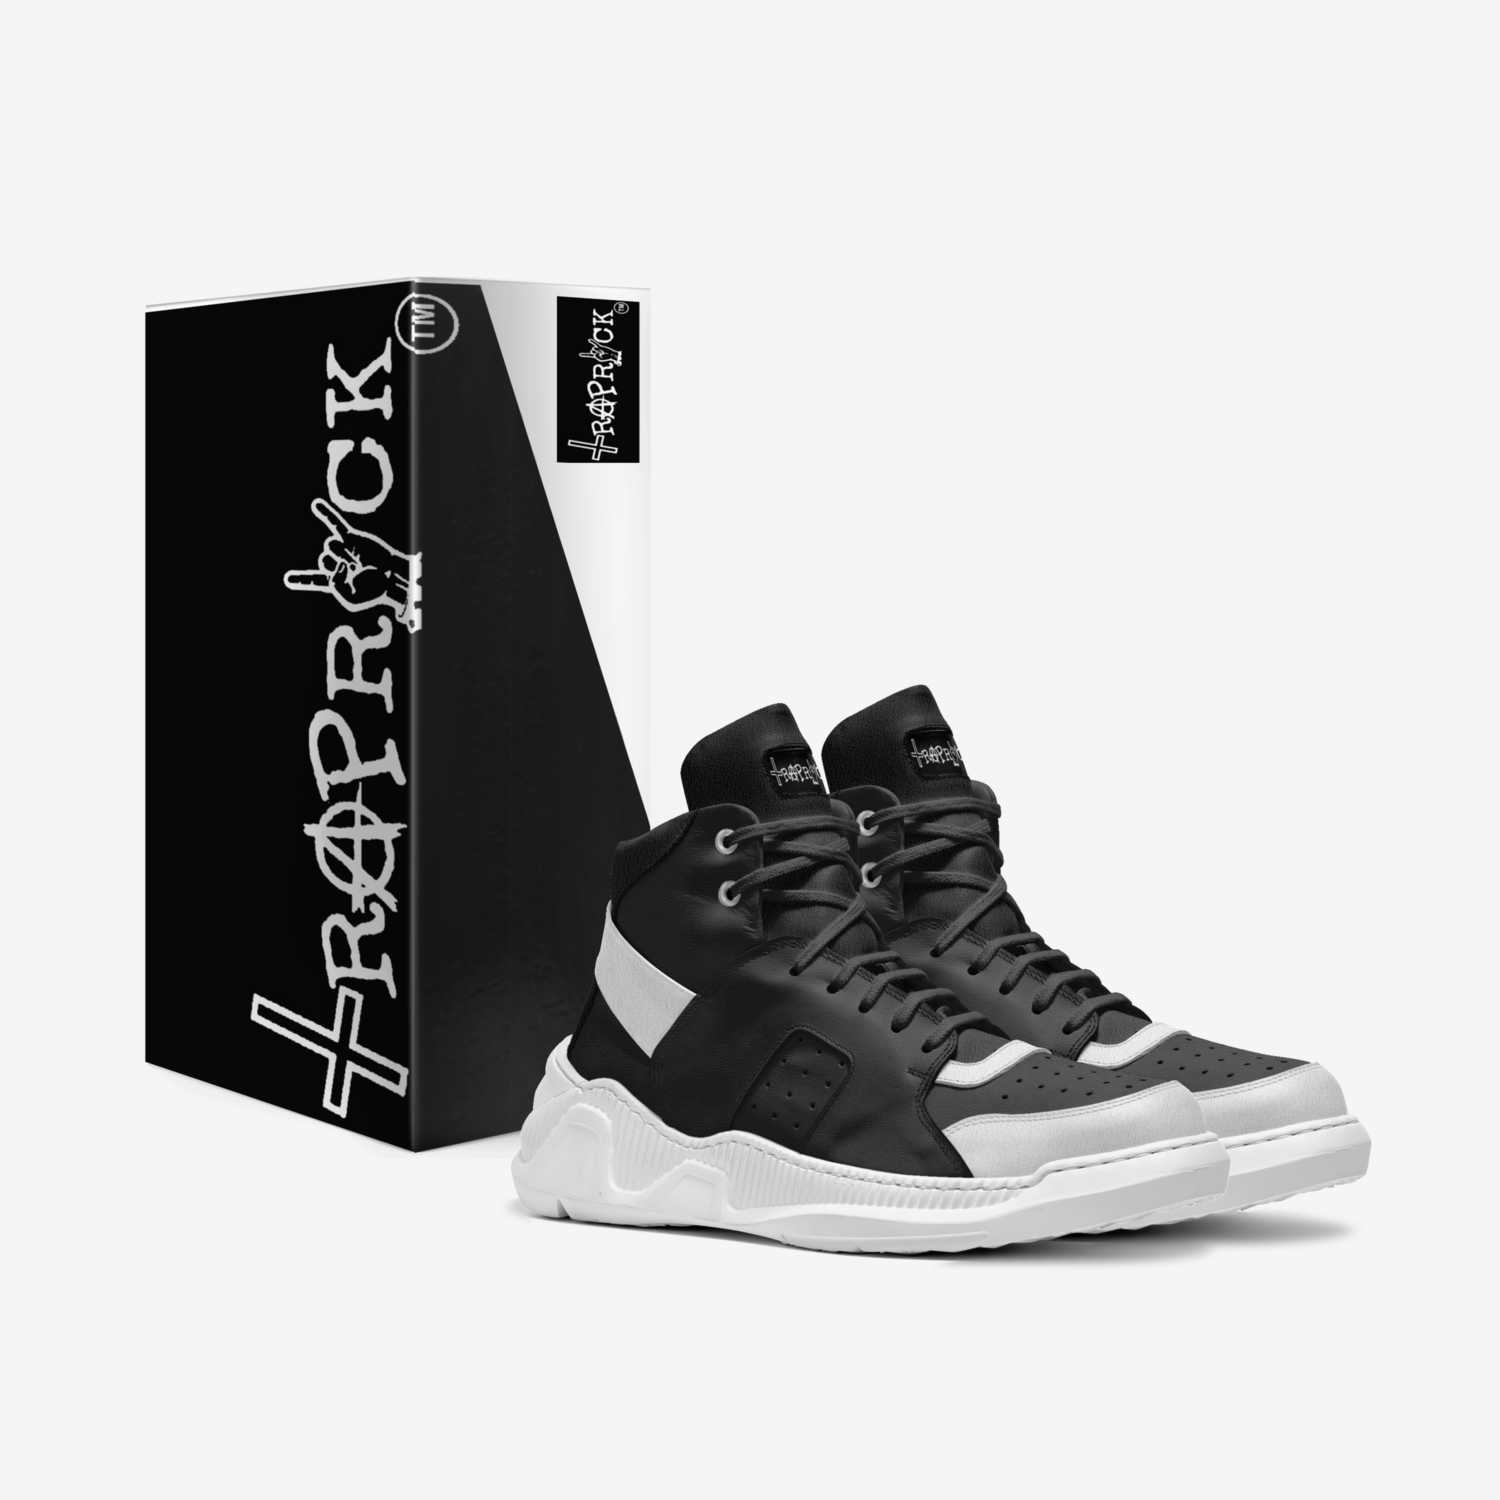 Traprockaz  custom made in Italy shoes by Cade Calloway | Box view